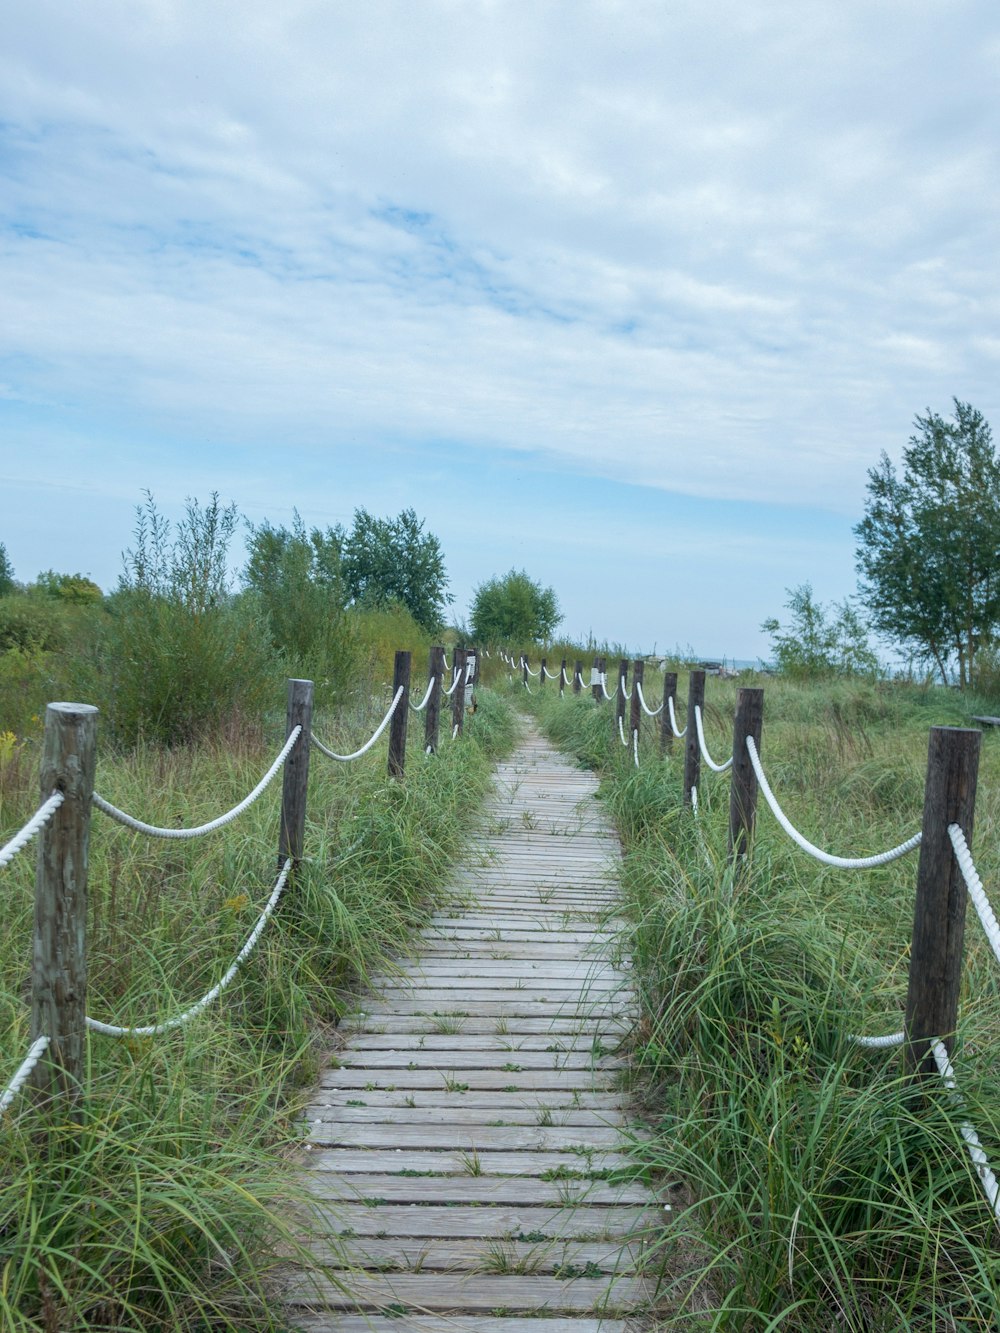 a wooden path leading to a grassy field